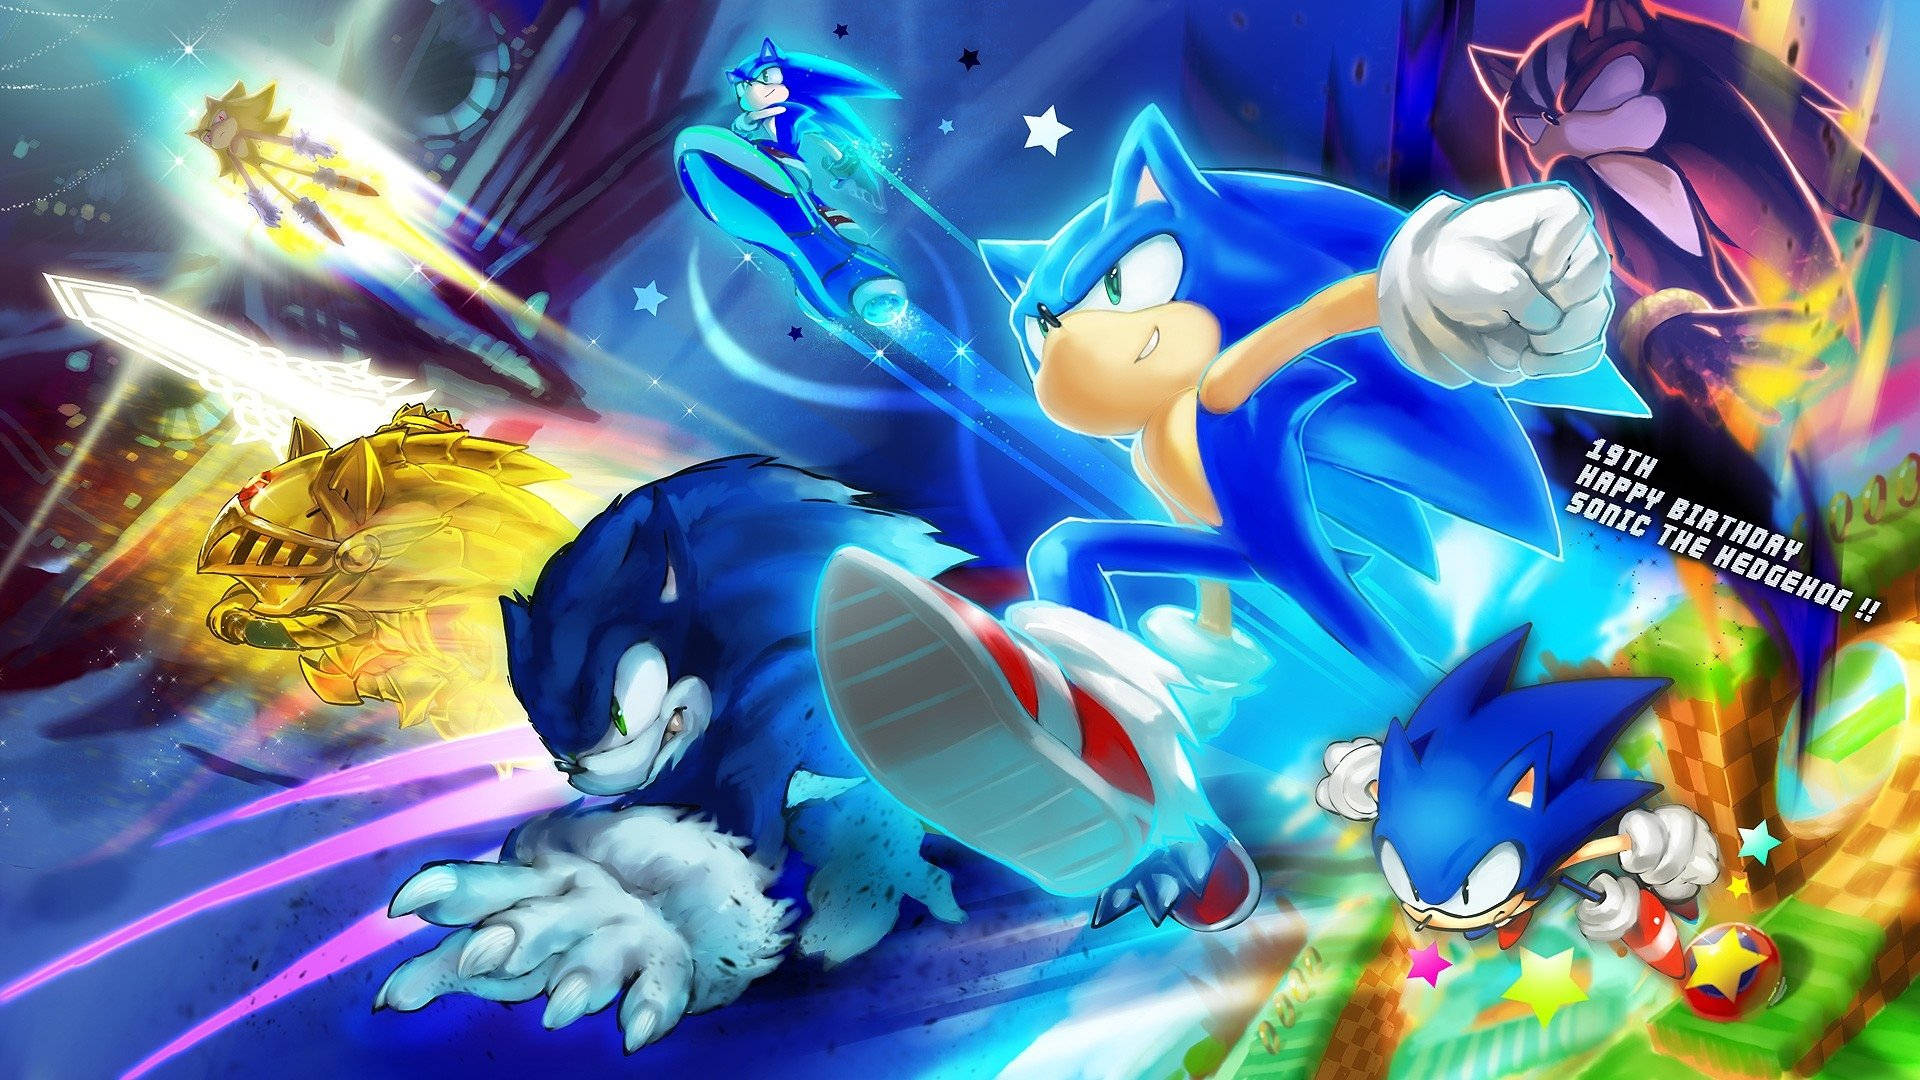 Cool Sonic: Always Ready For Adventure Wallpaper